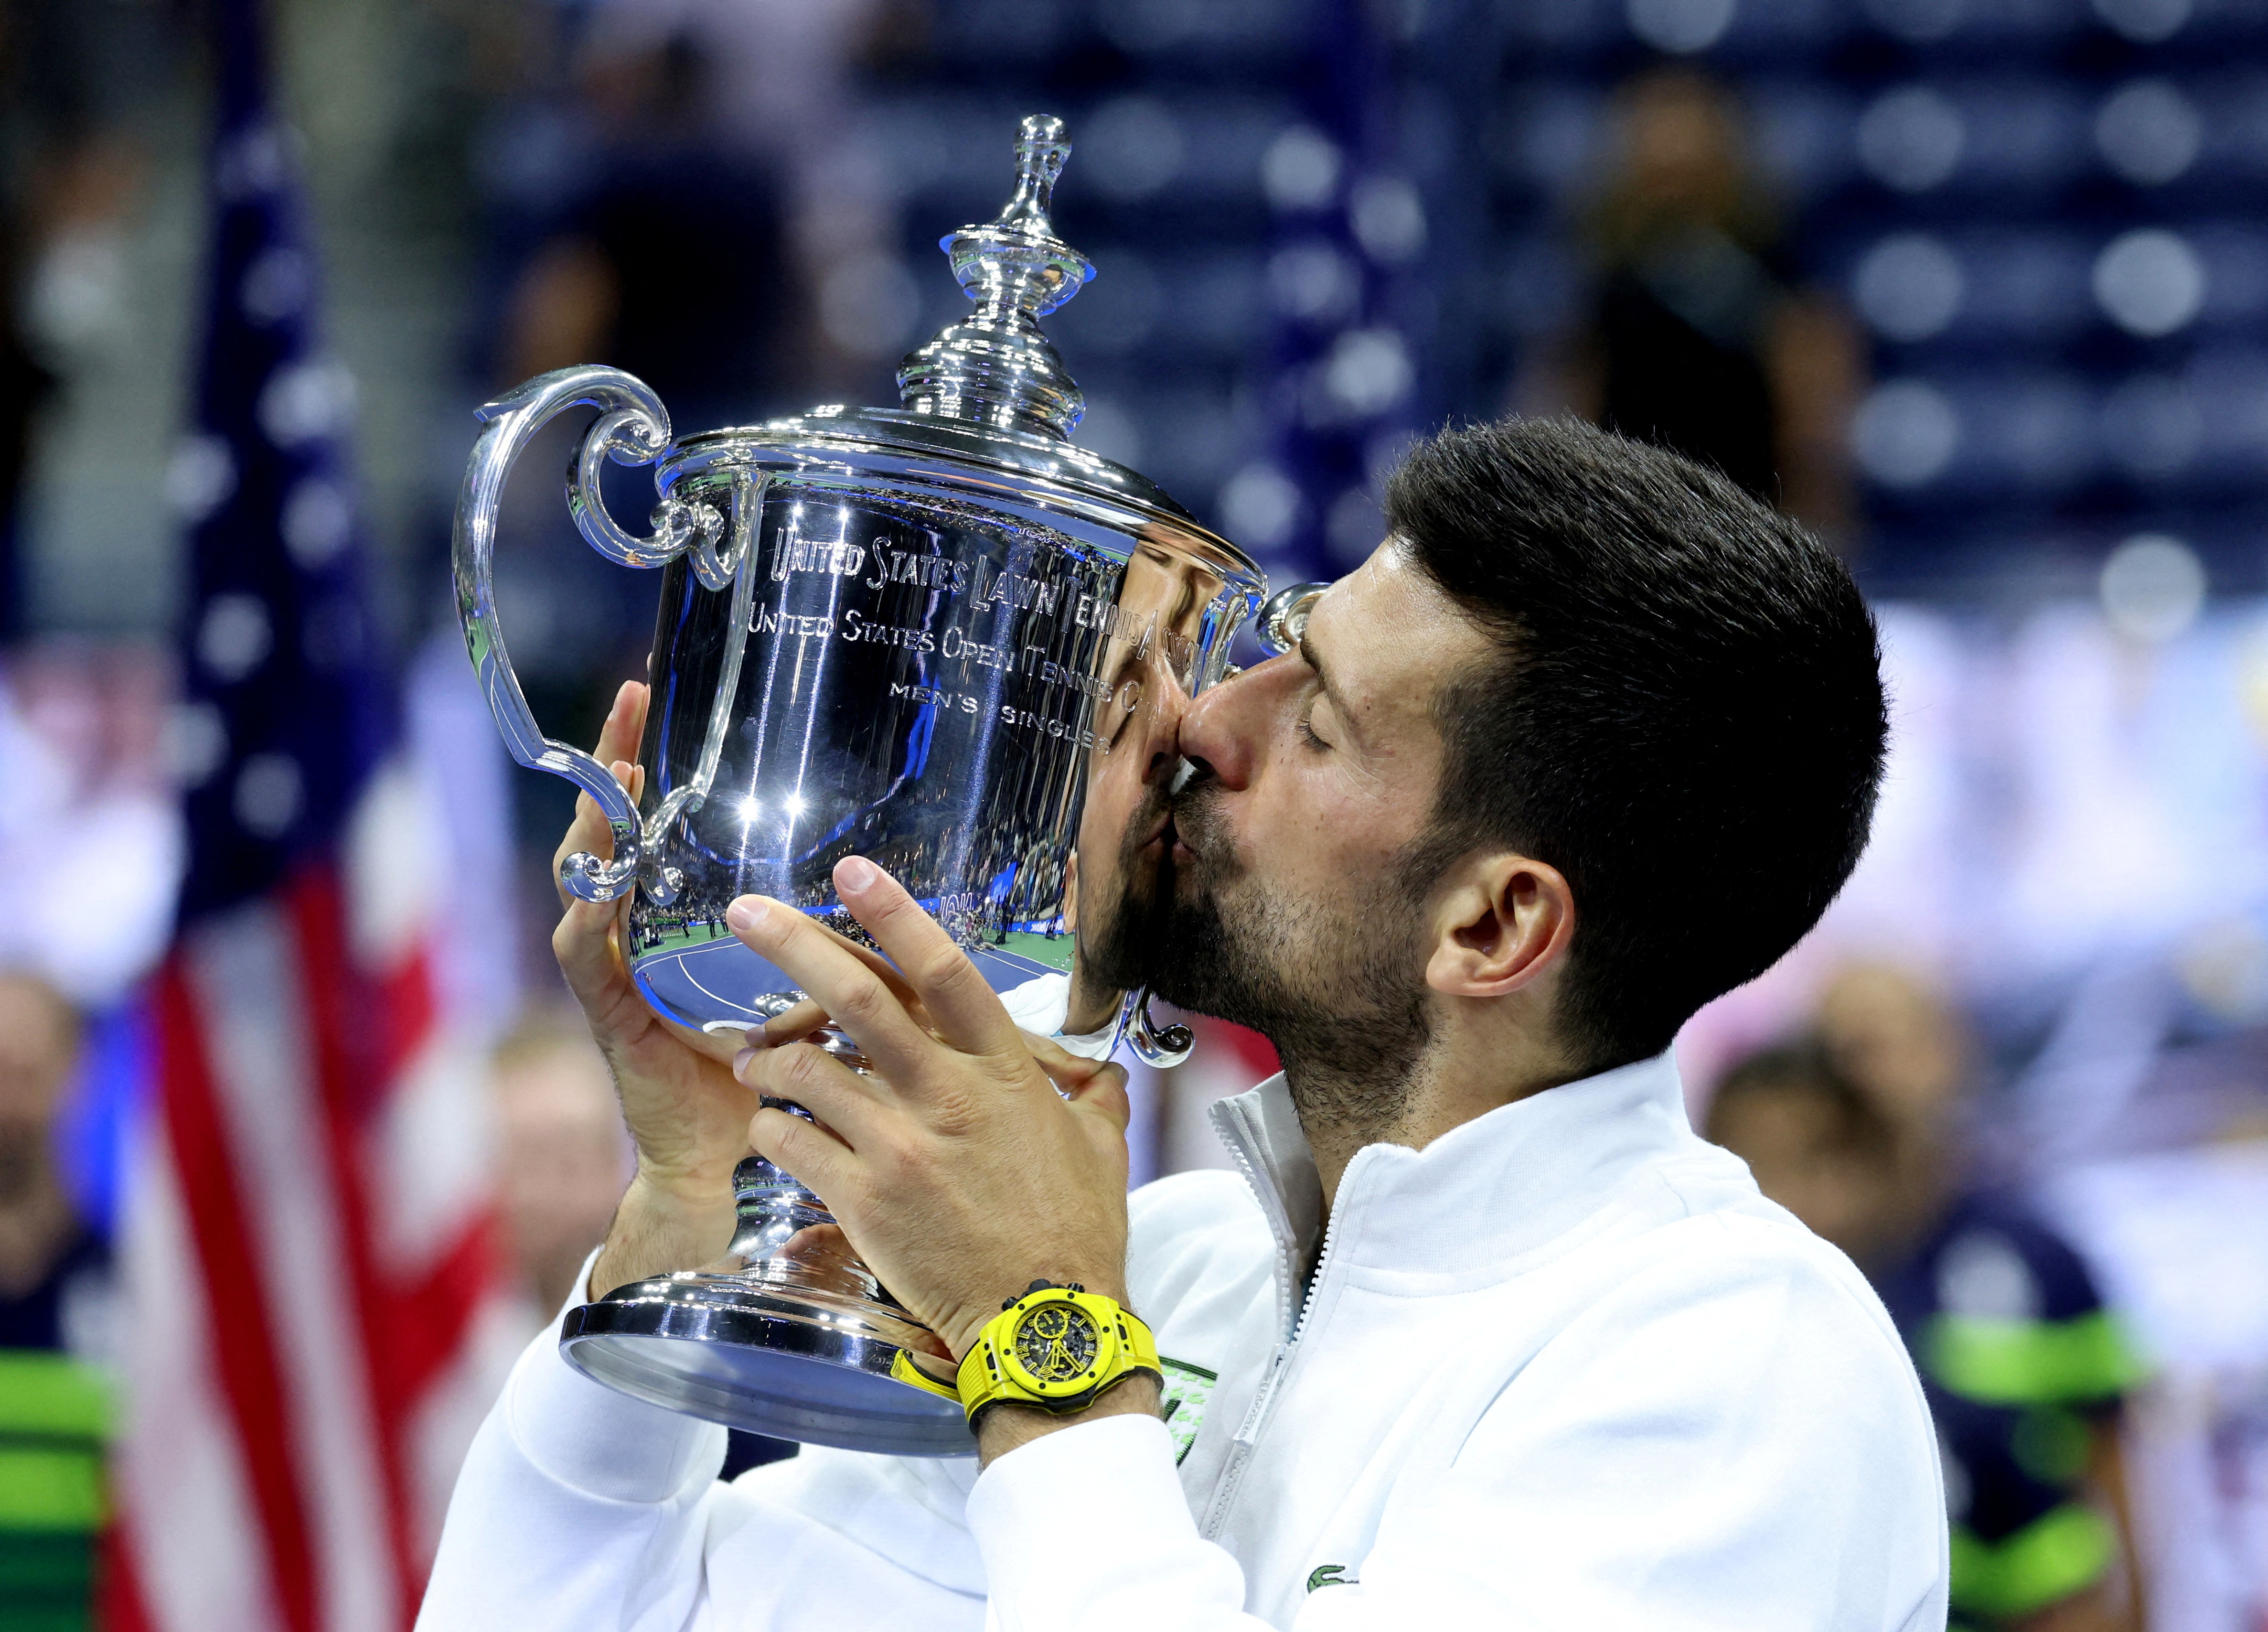 pouch brug dedikation Djokovic wins US Open for record equalling 24th Grand Slam | Reuters